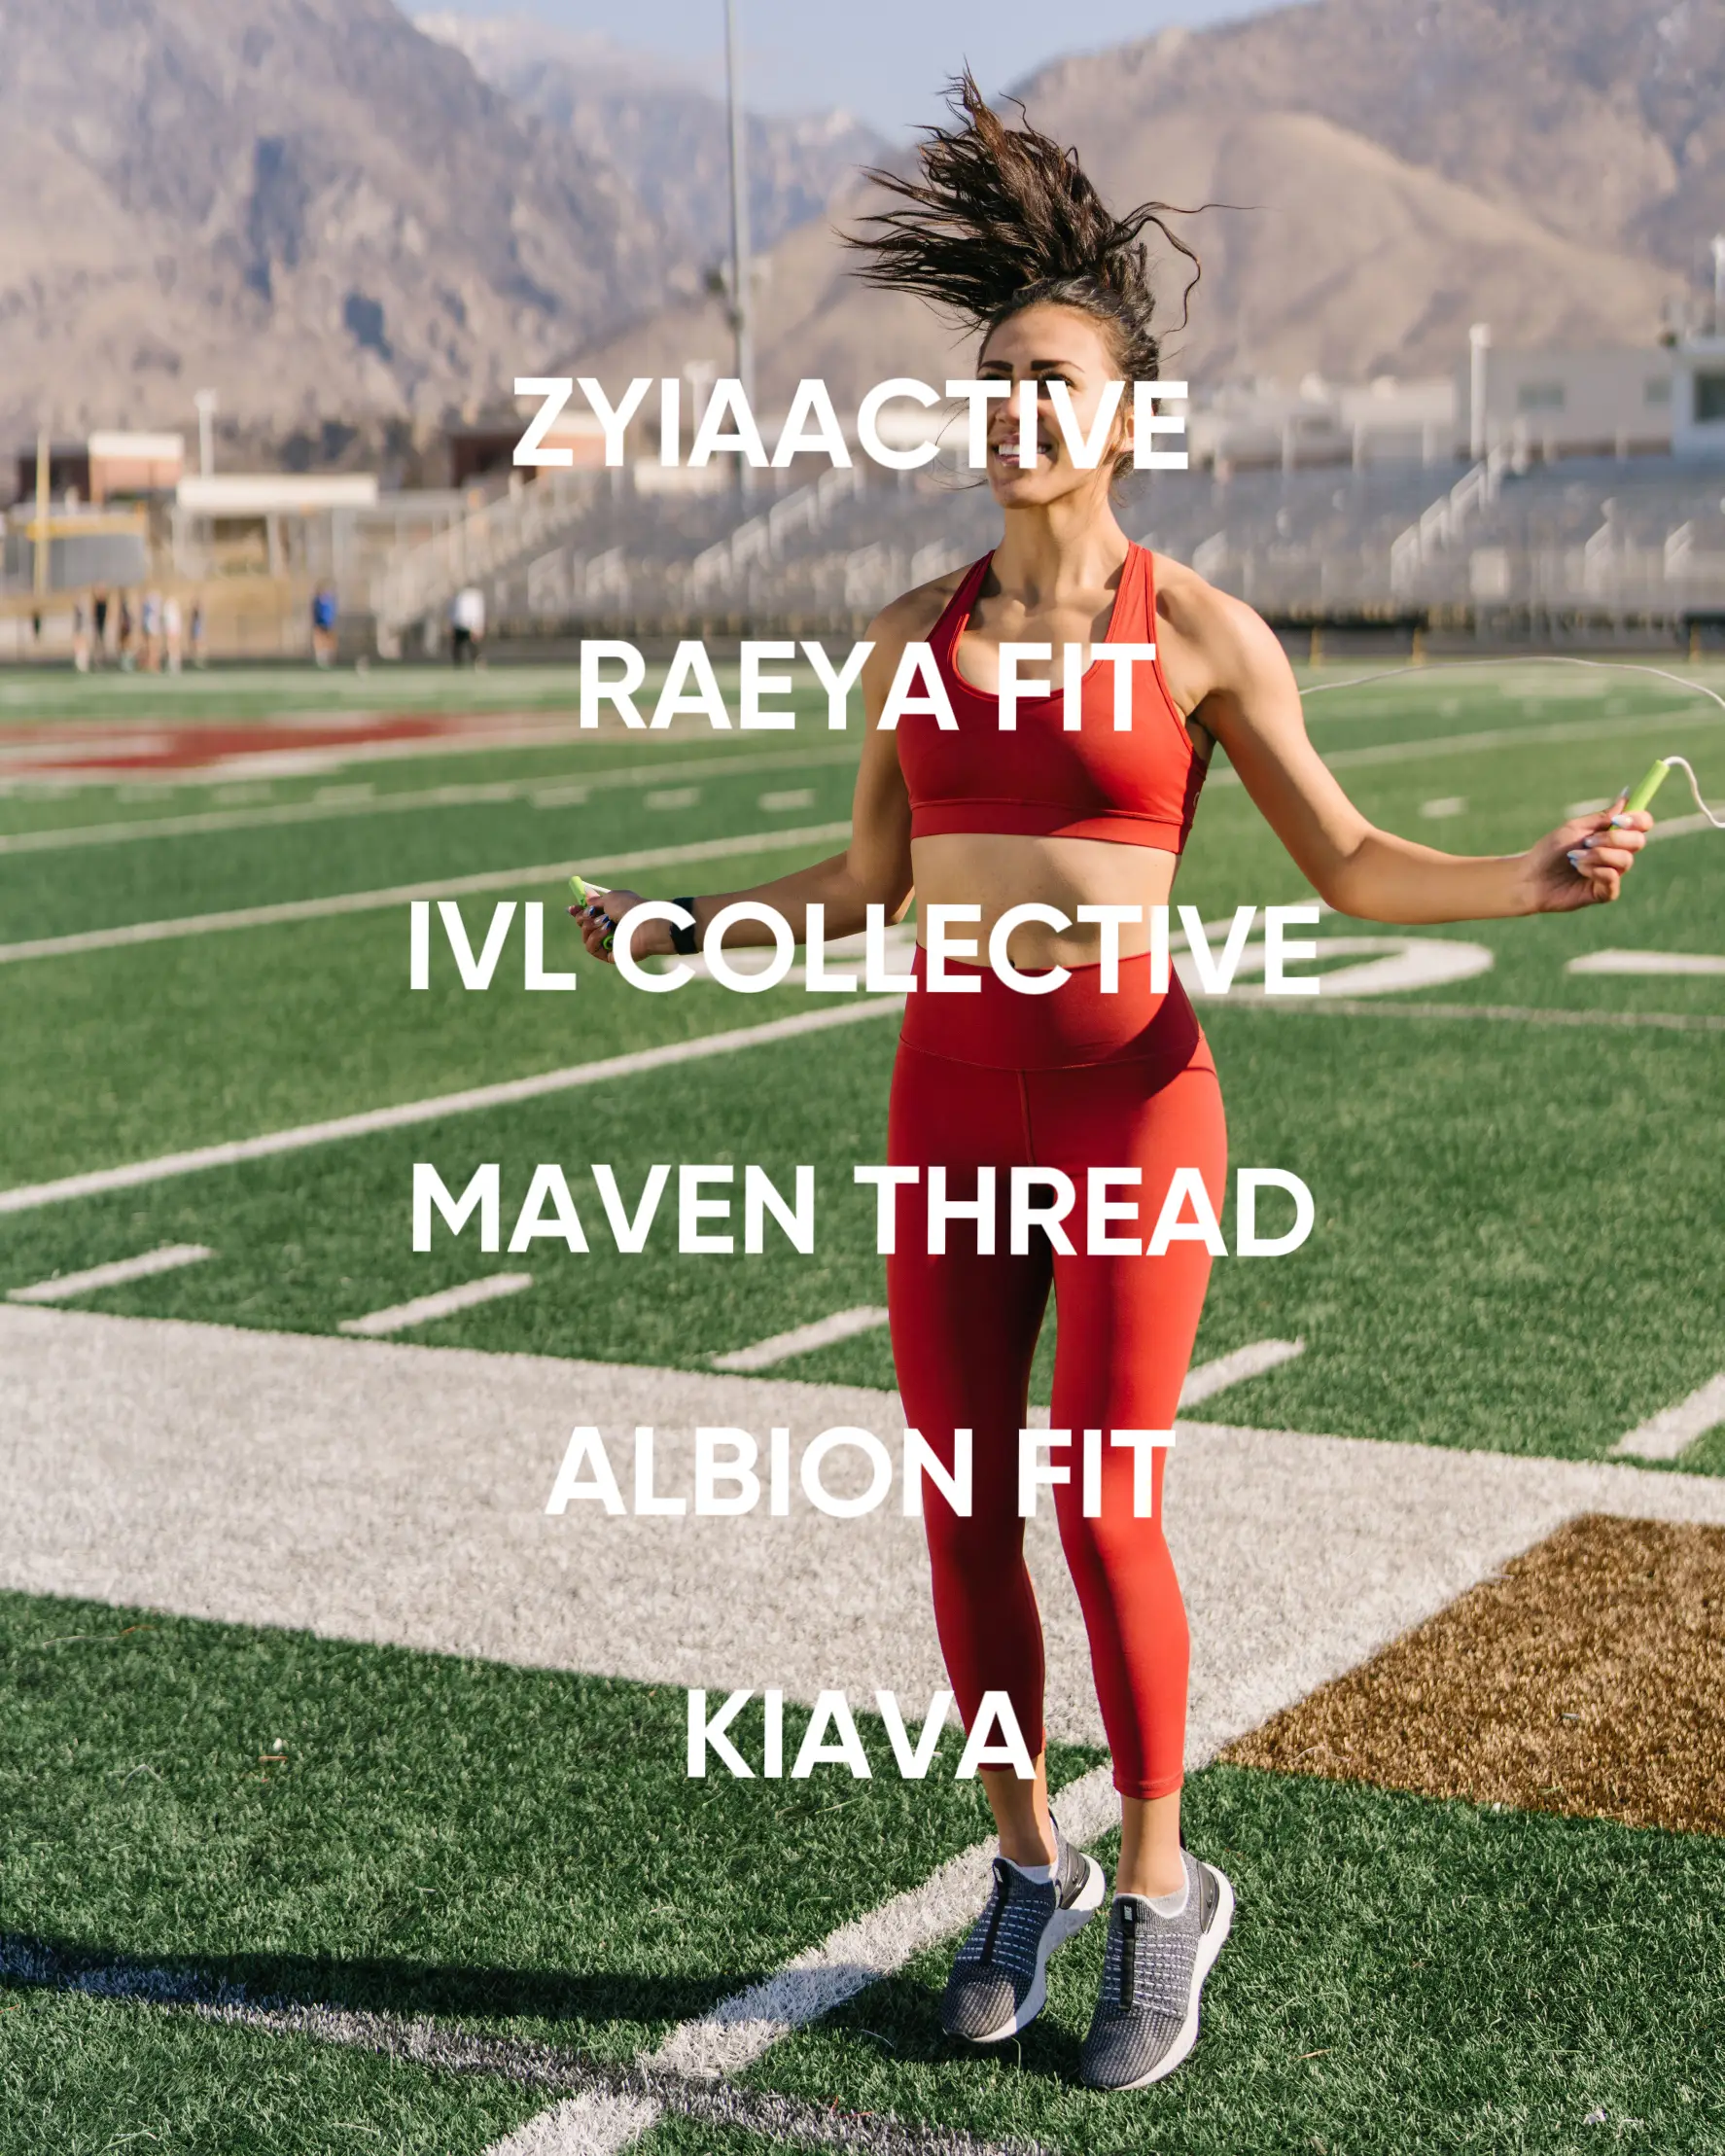 Current favs of activewear & WHY!, Gallery posted by Tiffany Shanice